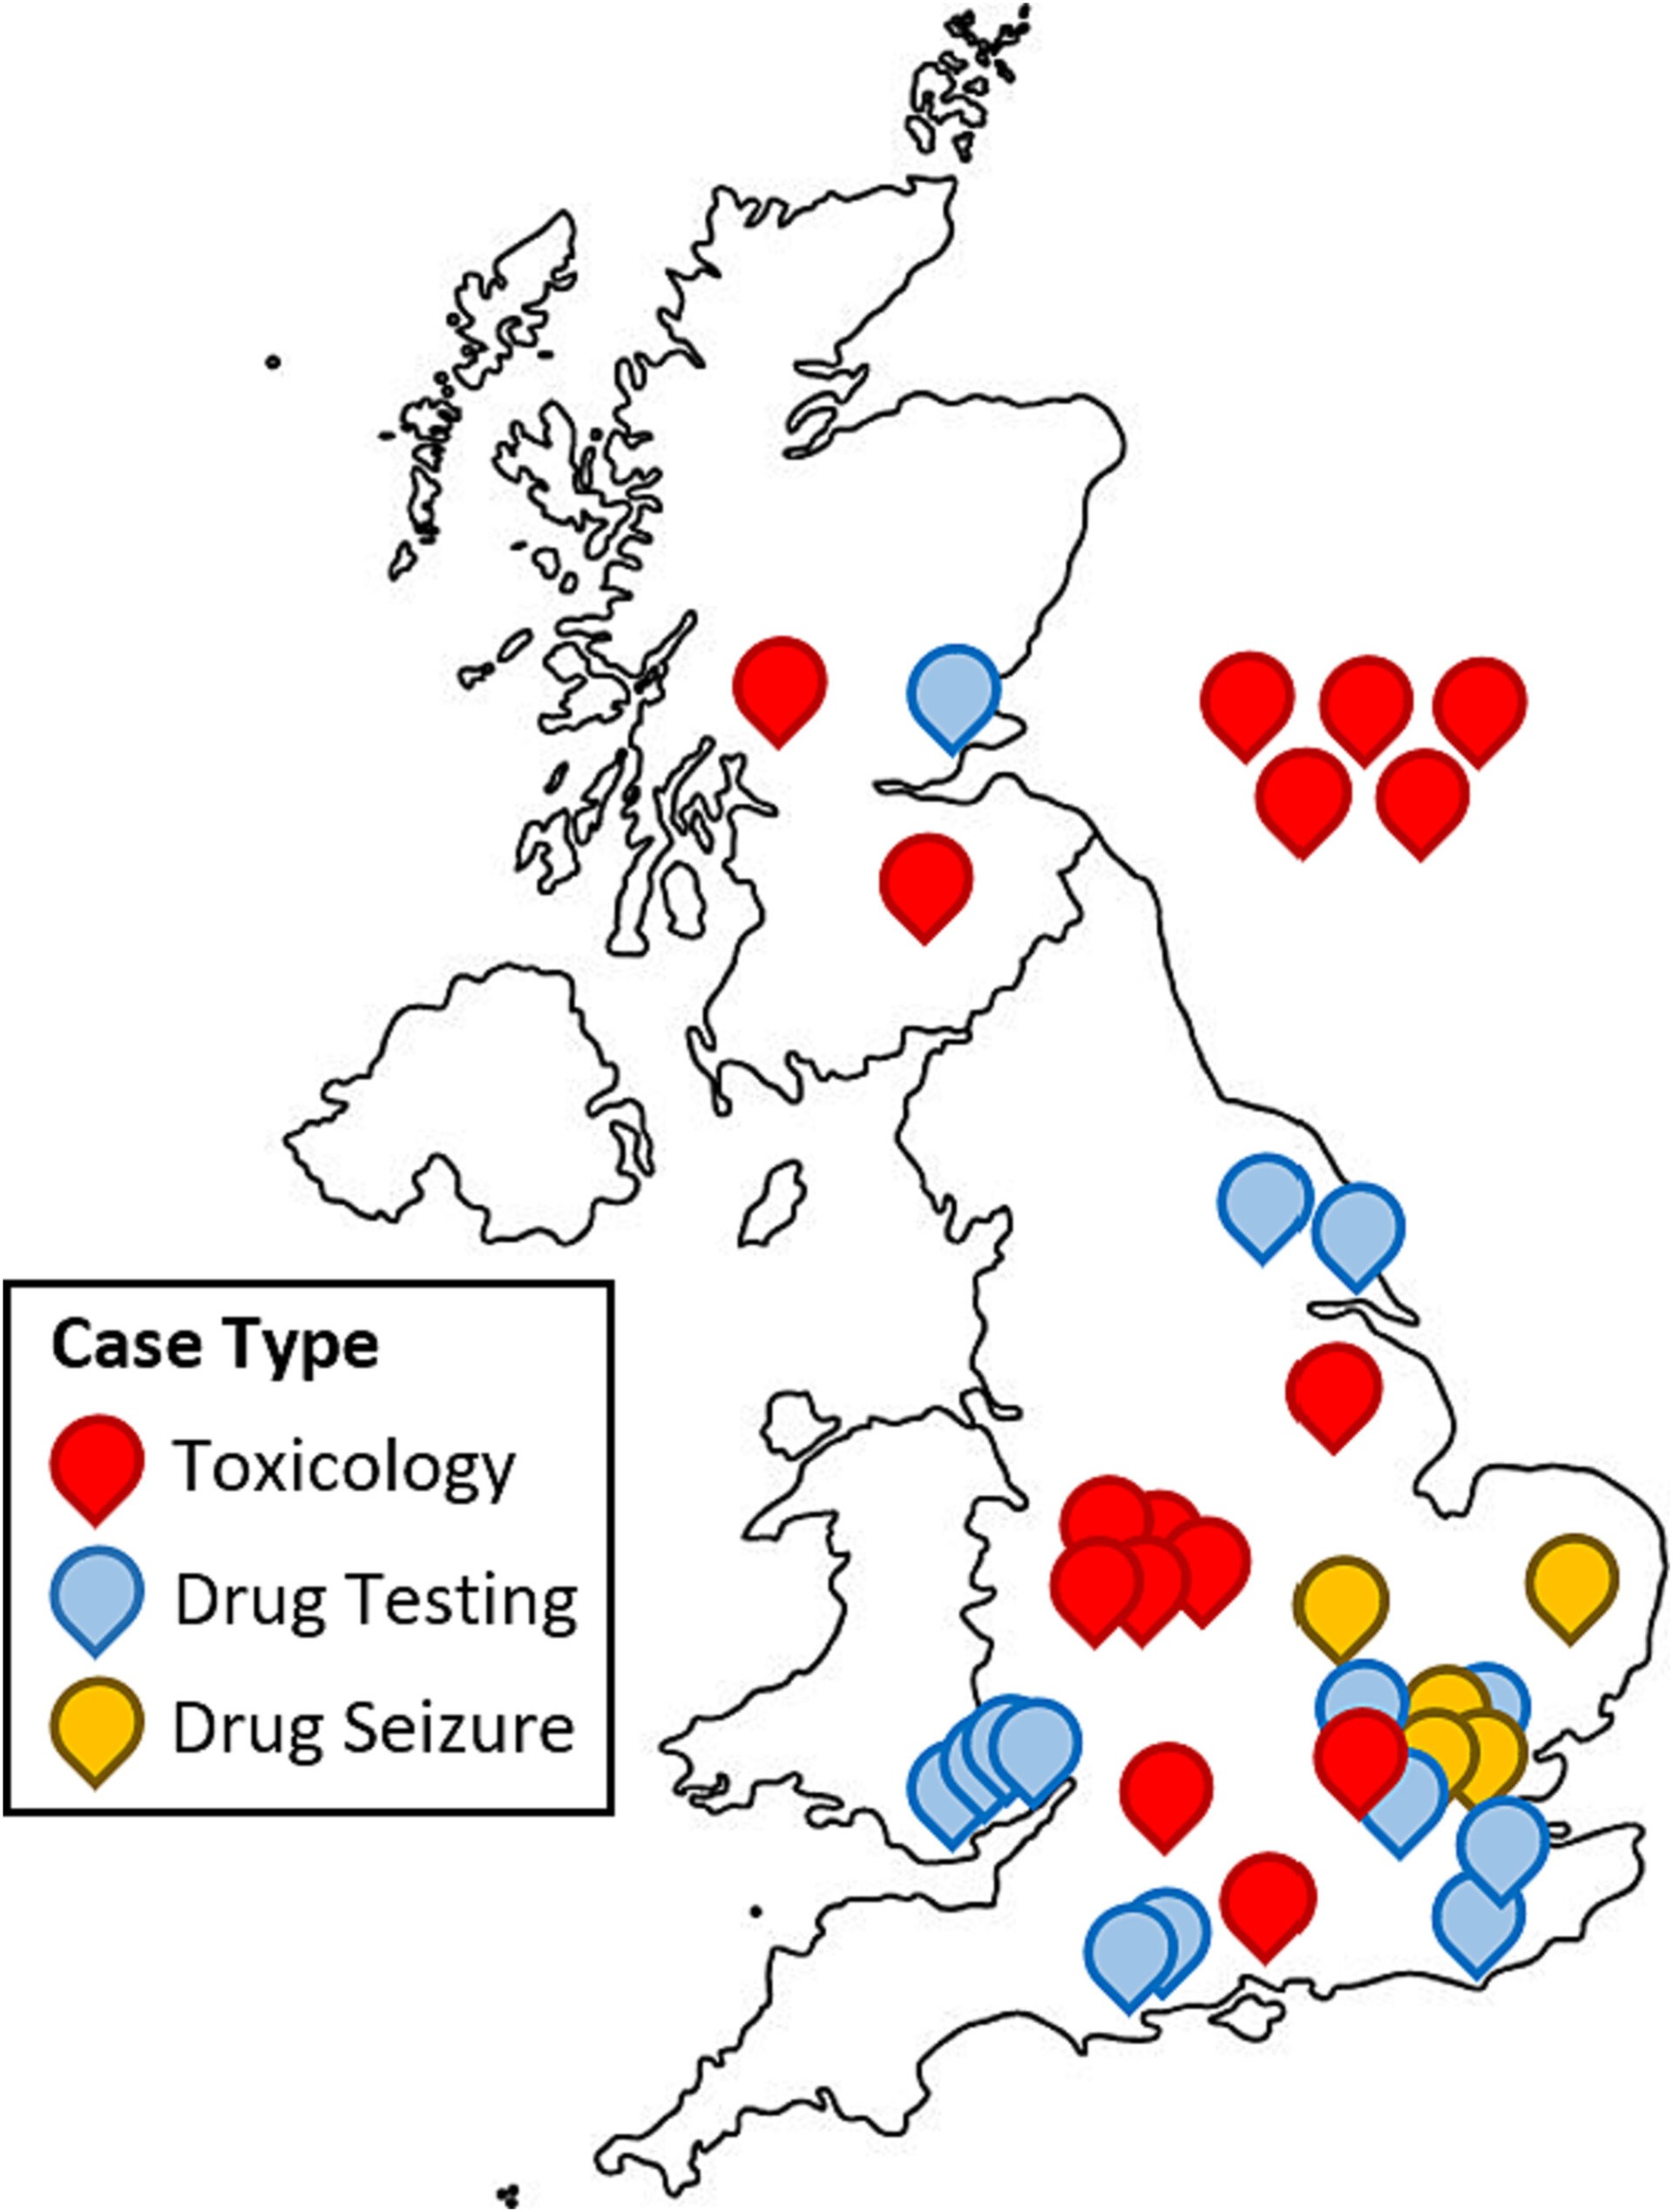 Locations of cases throughout the United Kingdom. Locations are approximated to the county or city from which they were reported. The five toxicology cases where location was completely redacted are placed to the right of the map, the two cases with area location in Scotland redacted are randomly placed. 